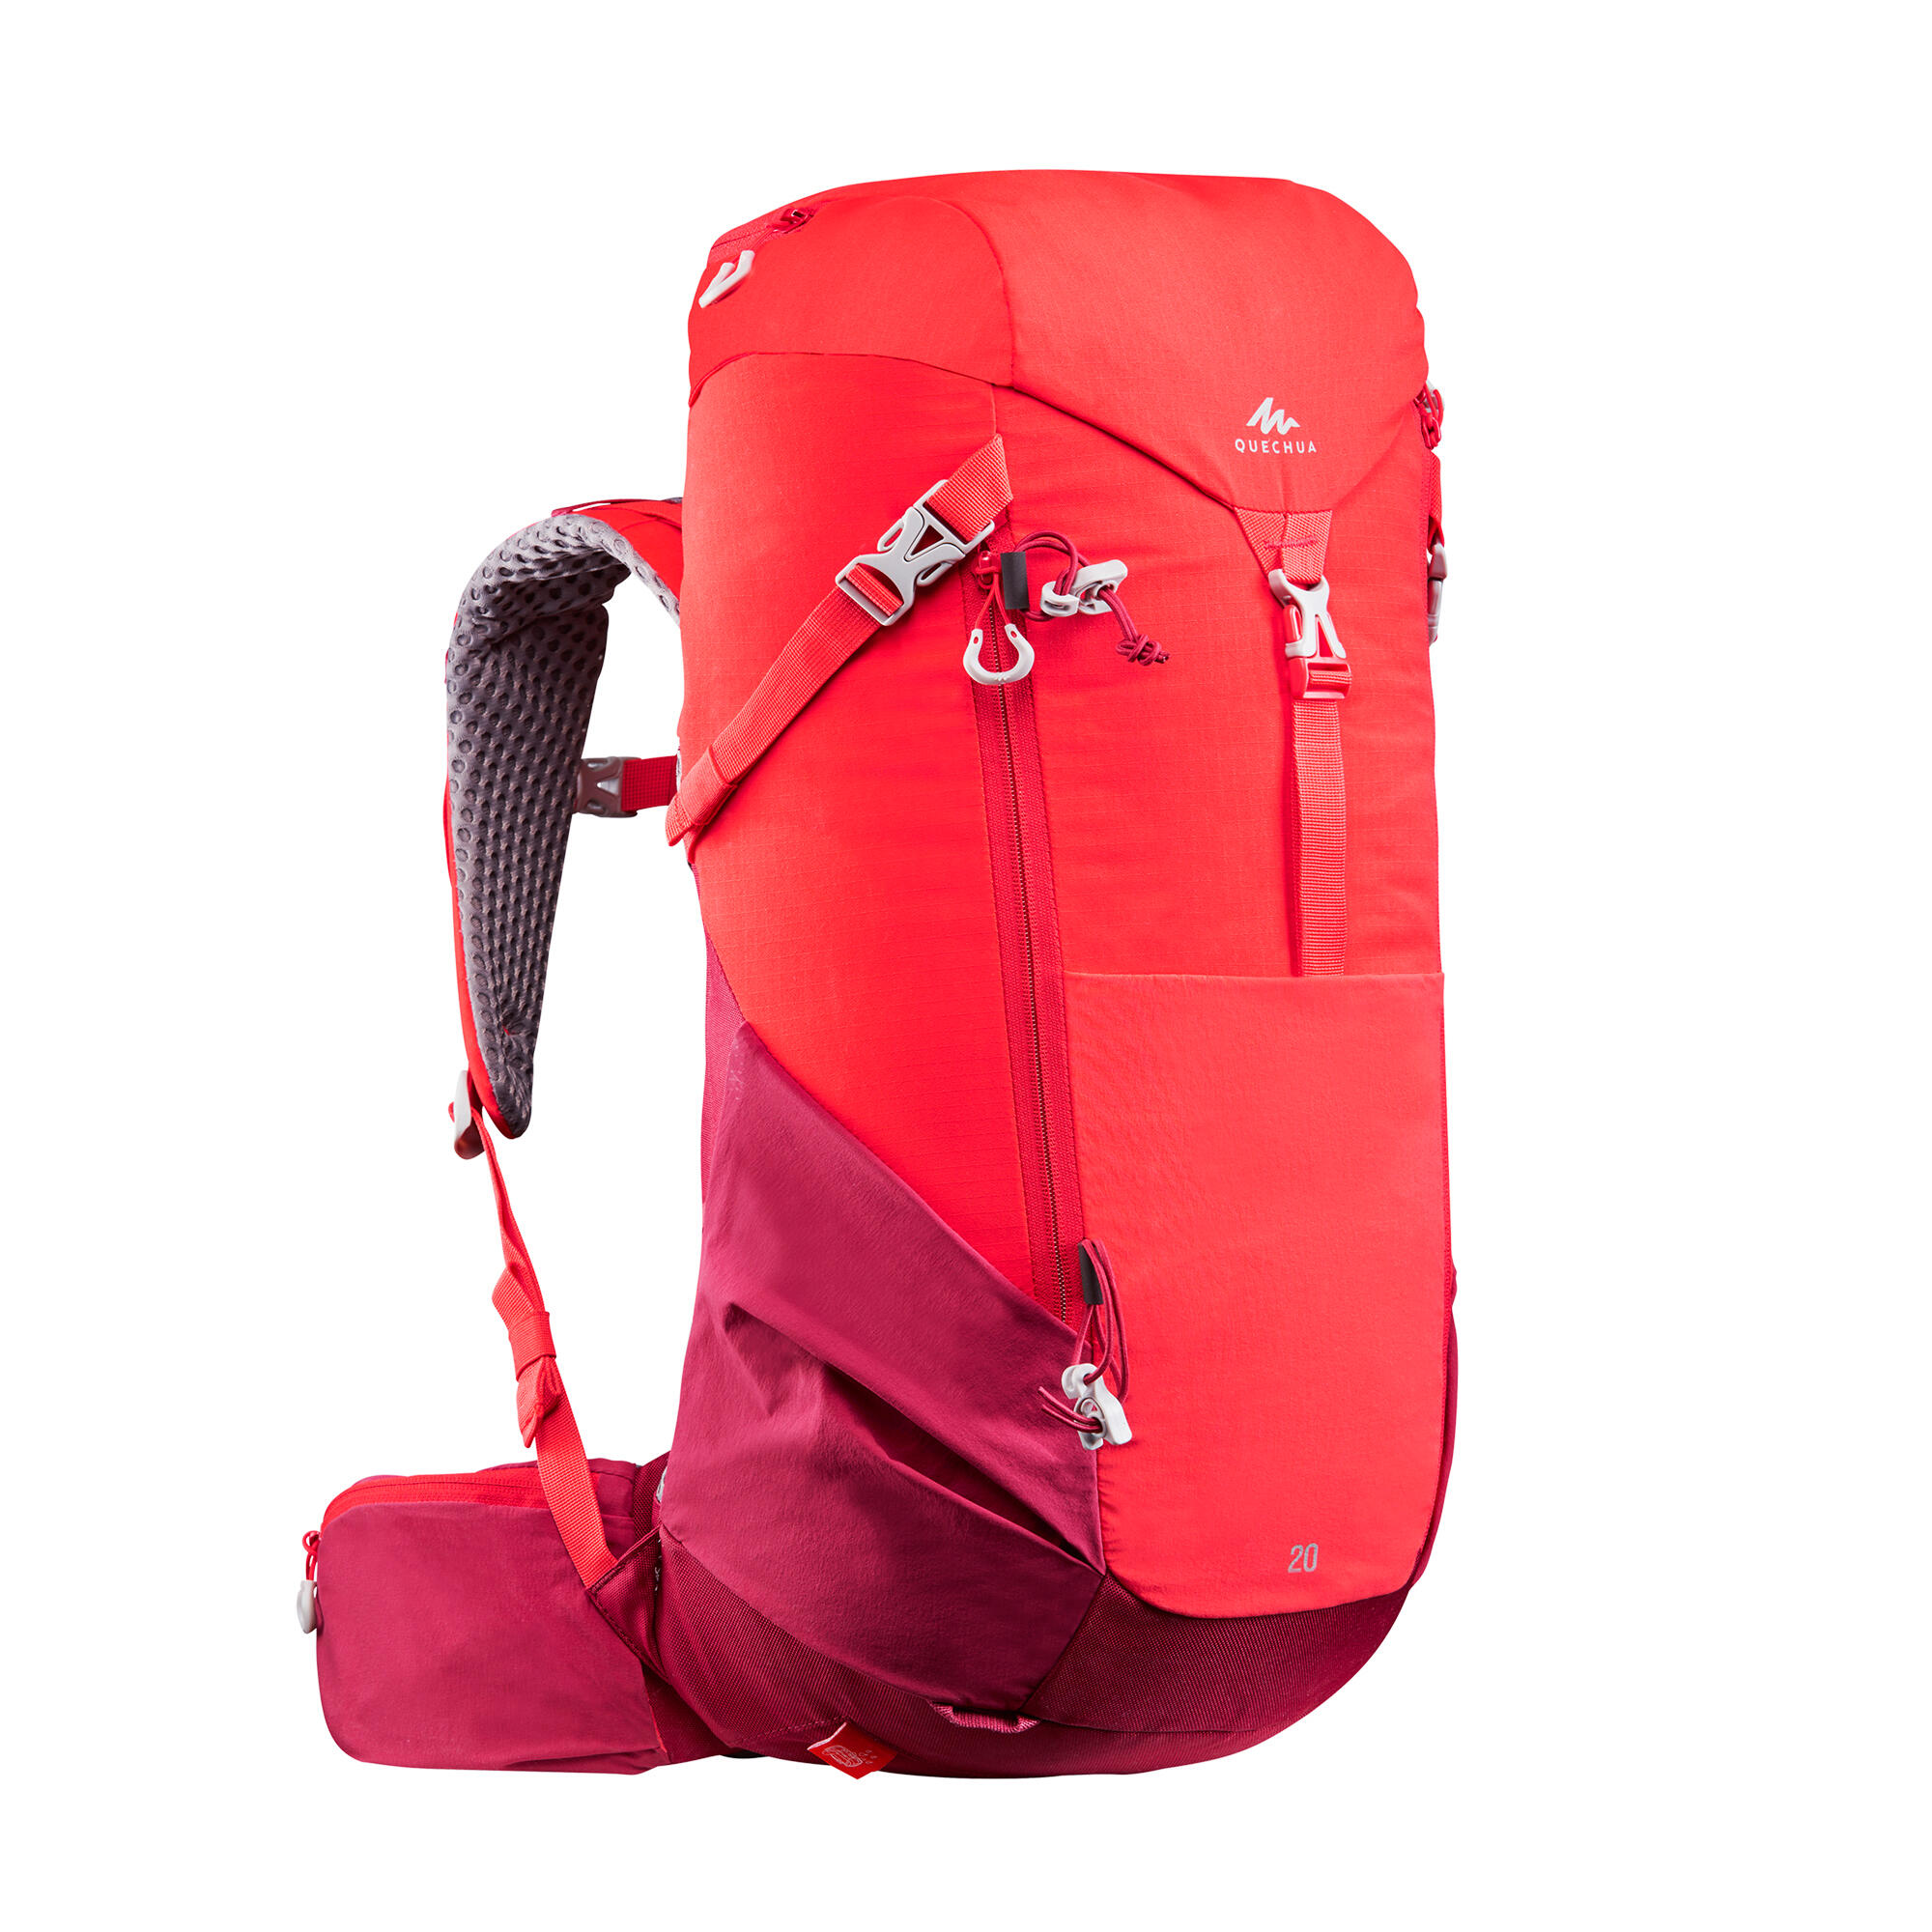 Mountain walking backpack - MH500 20L 